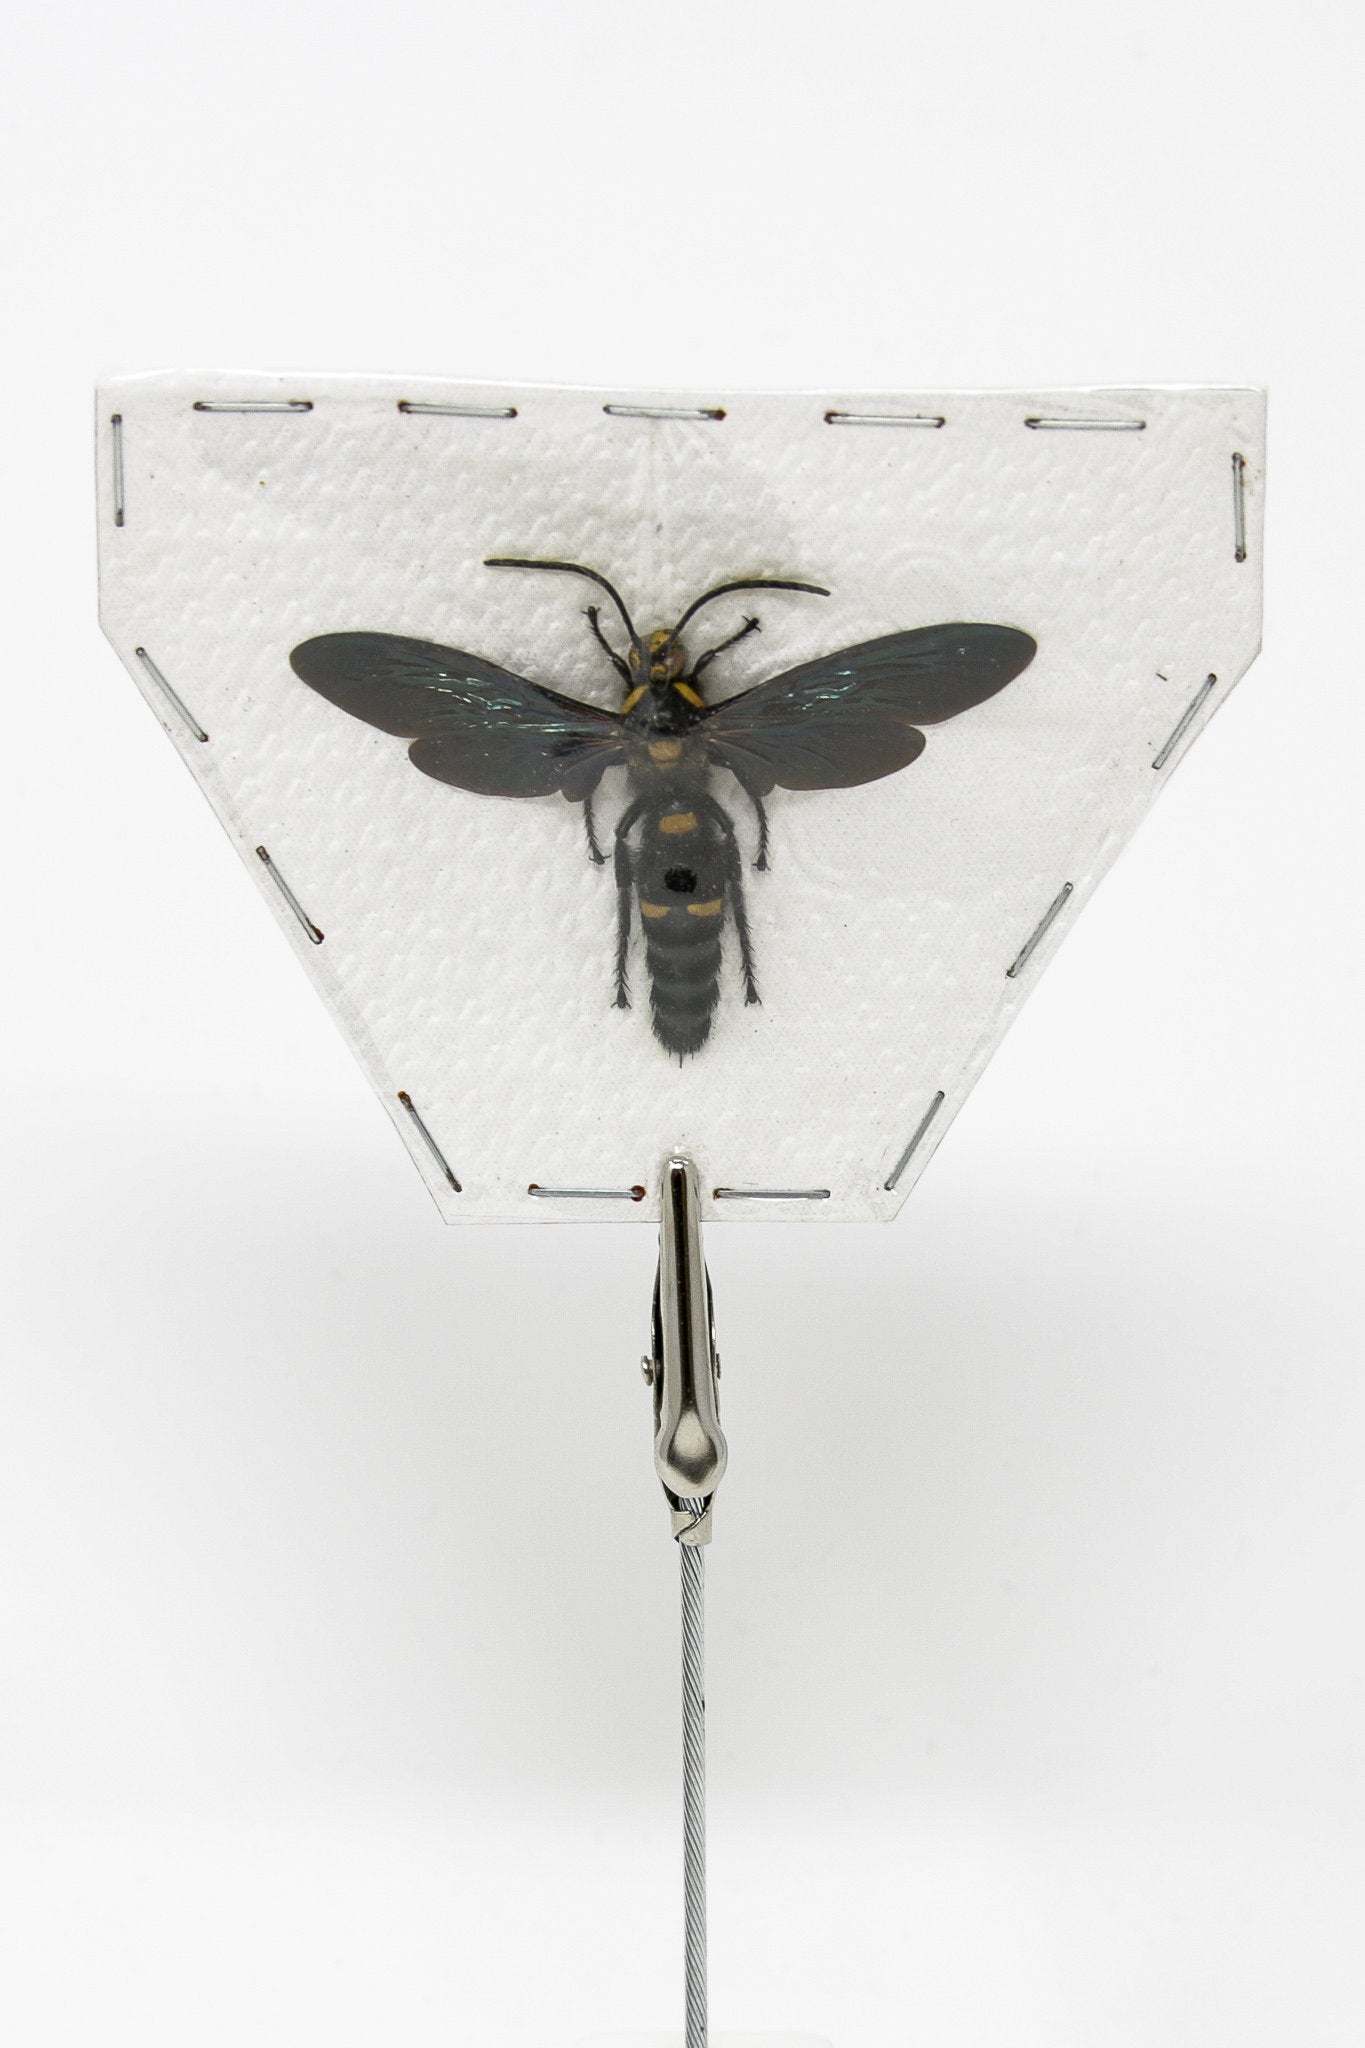 2 x Megascolia procer | Giant Scoliid Wasp 2.5-3 Inch Wingspan | A1 Unmounted Specimen